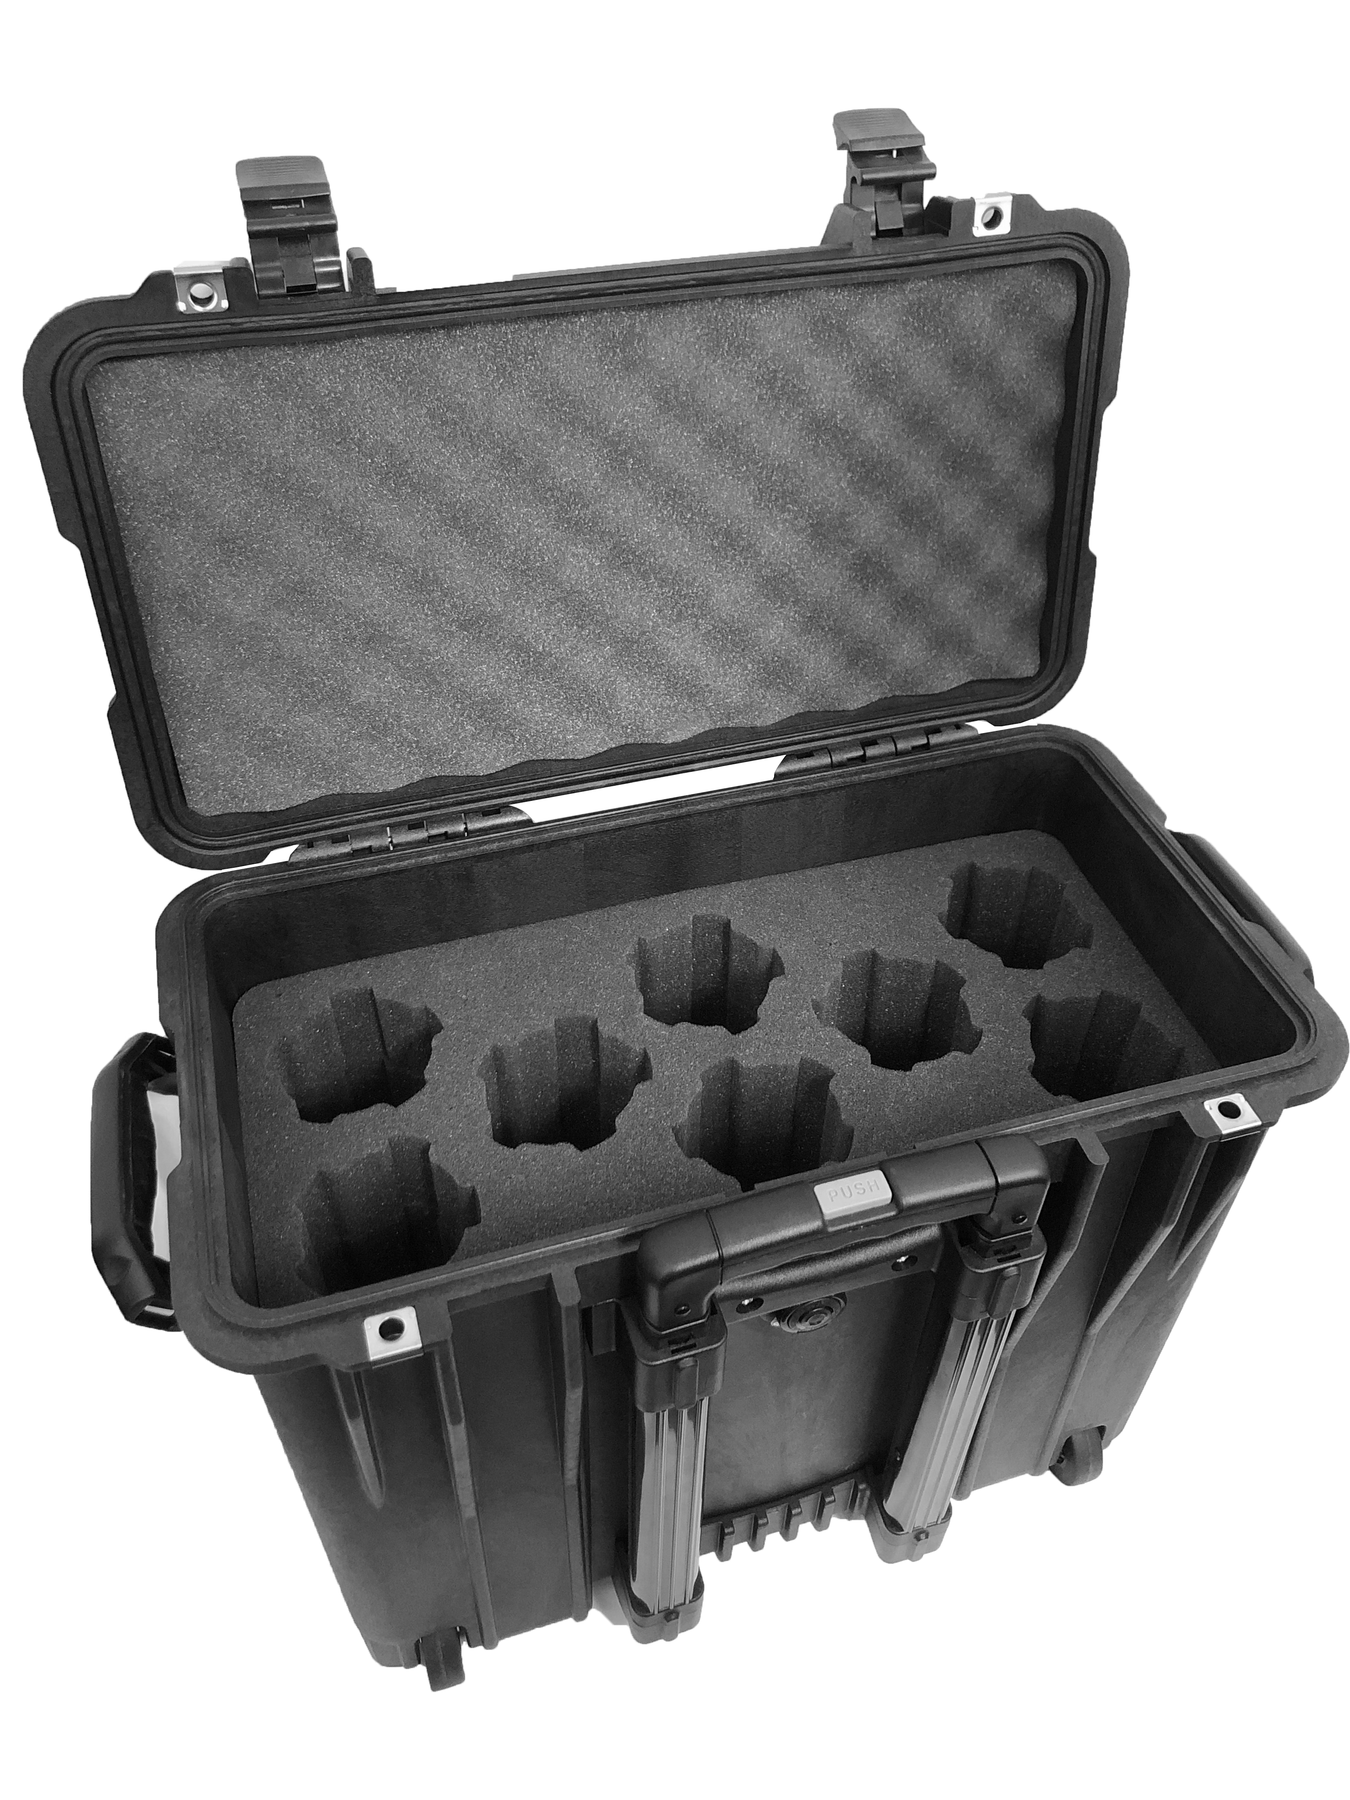 Plano case 11852 Replacement Foam Insert Set (2 Pieces), Cobra Foam Inserts  and Cases